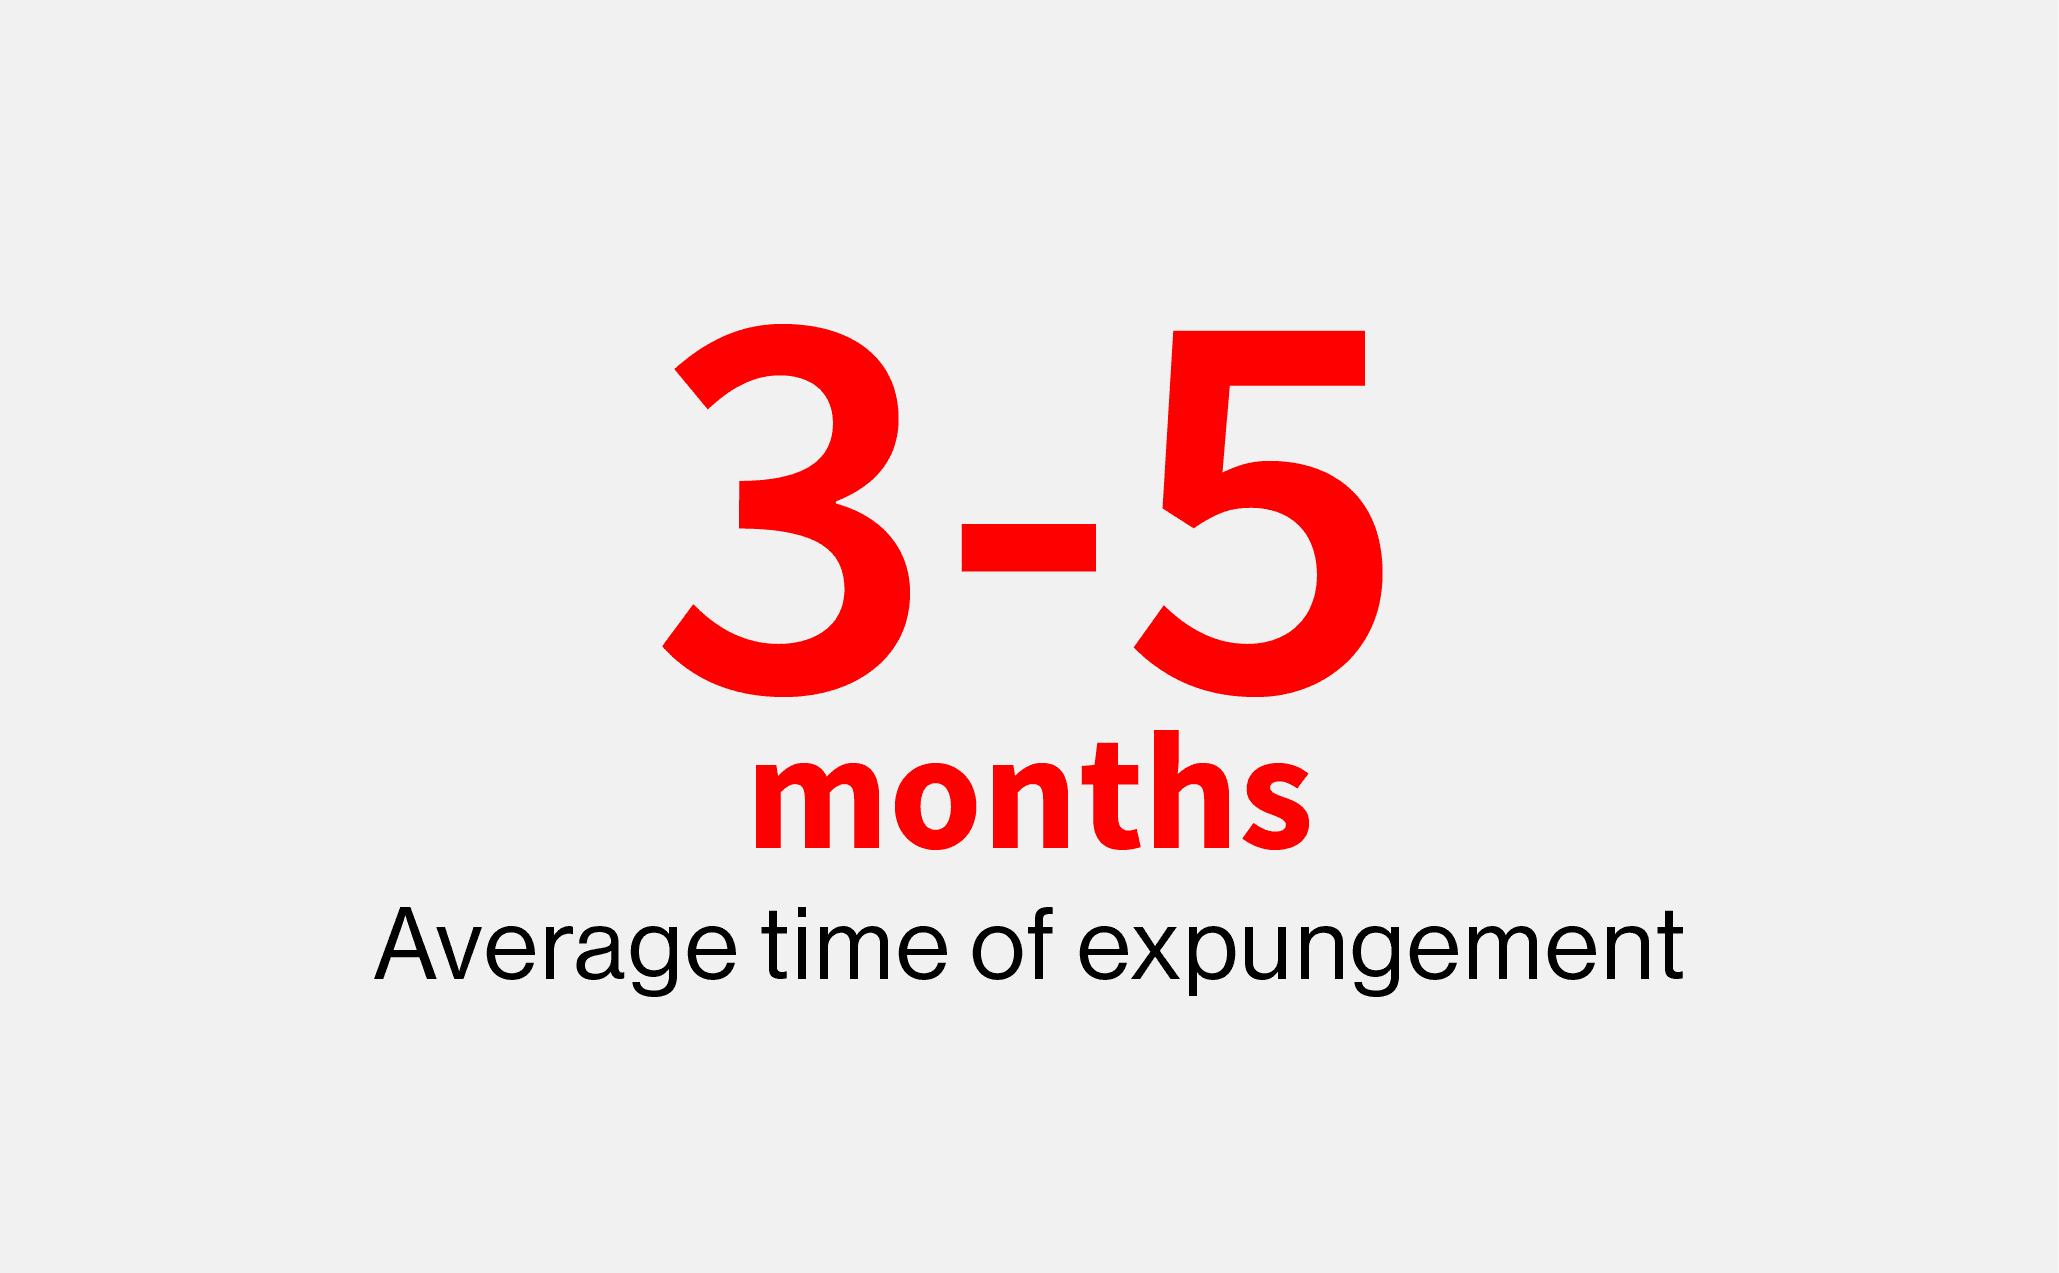 Fastest expungement firm